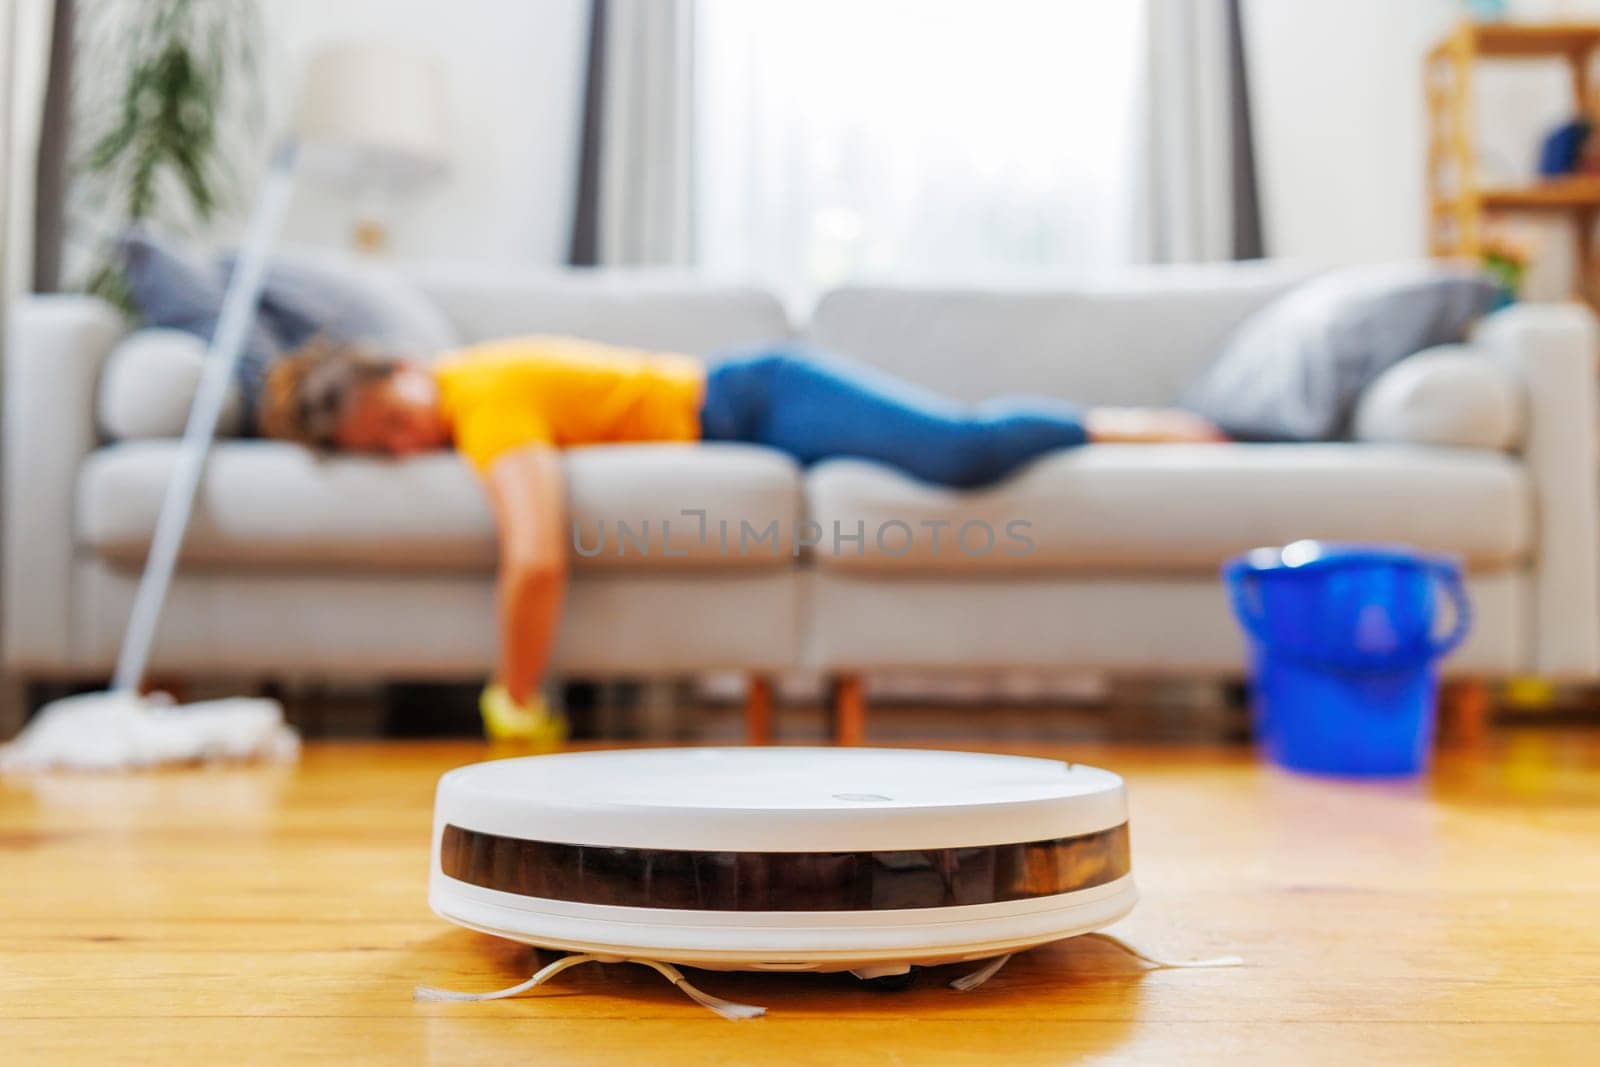 Robot Vacuum Cleaning Floor While Woman Rests by andreyz